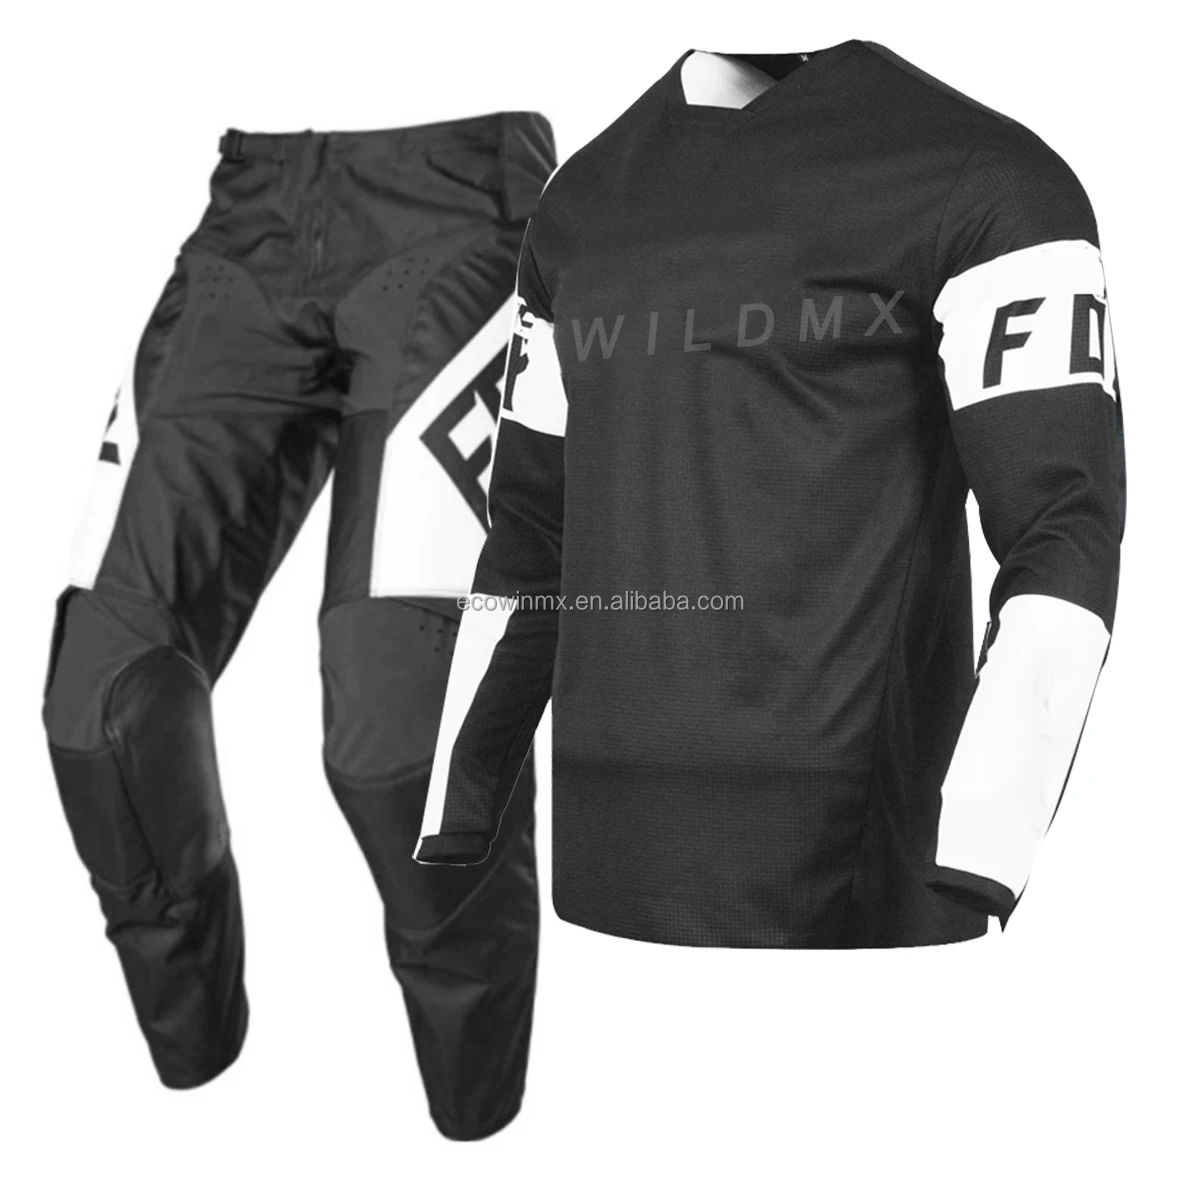 

WILDMX 2021 Mx 360 Motocross Gear Pro Circuit Motocross Racing Suit Dirtbike Off-road Jersey And Pants Motorcycle Combos, Customized color